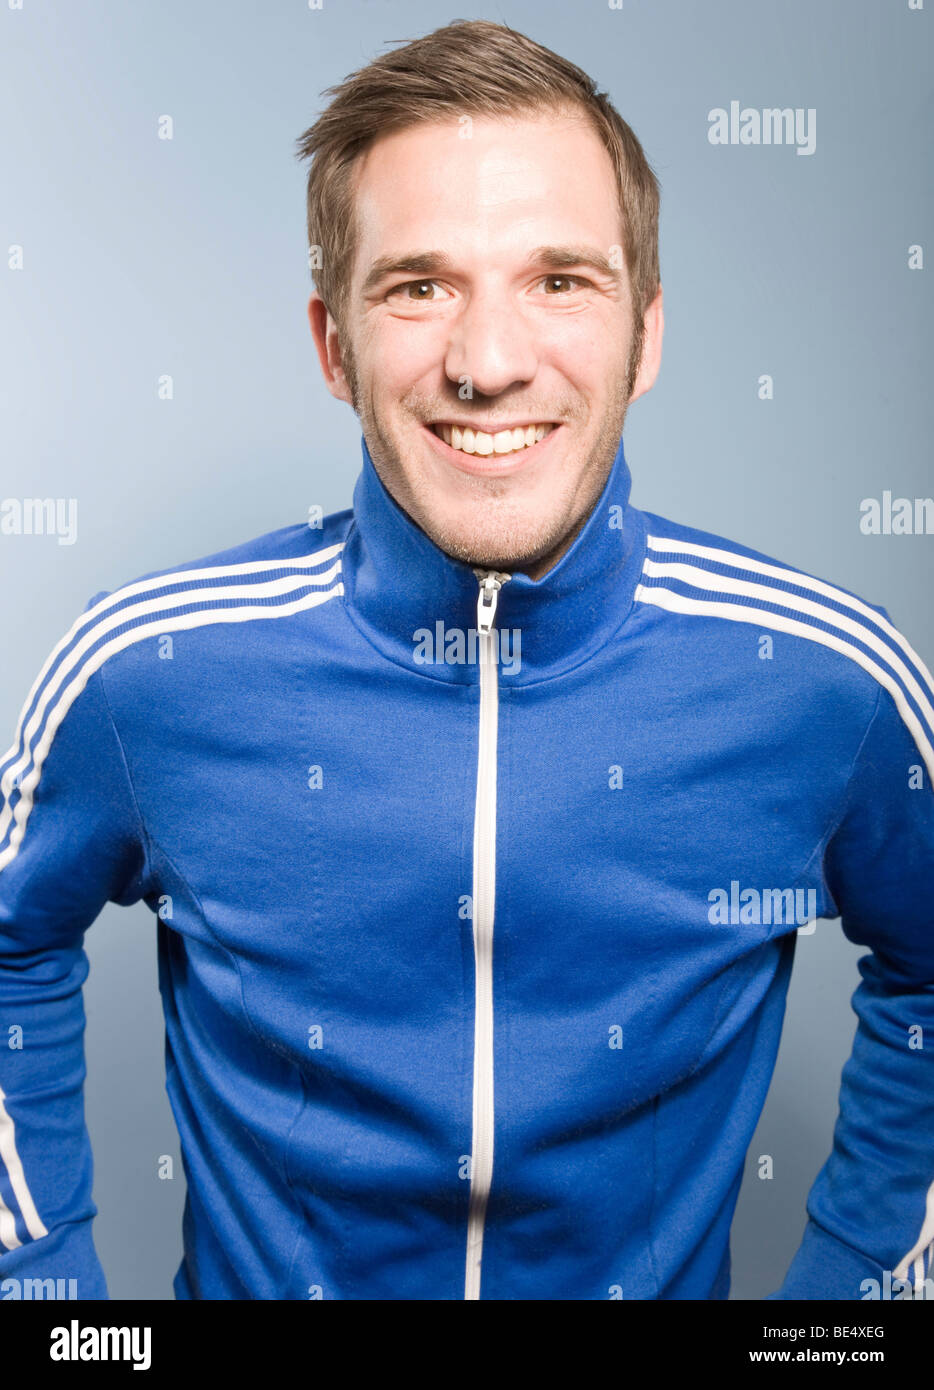 Young man smiling while posing in a retro style Adidas sport suit Stock  Photo - Alamy